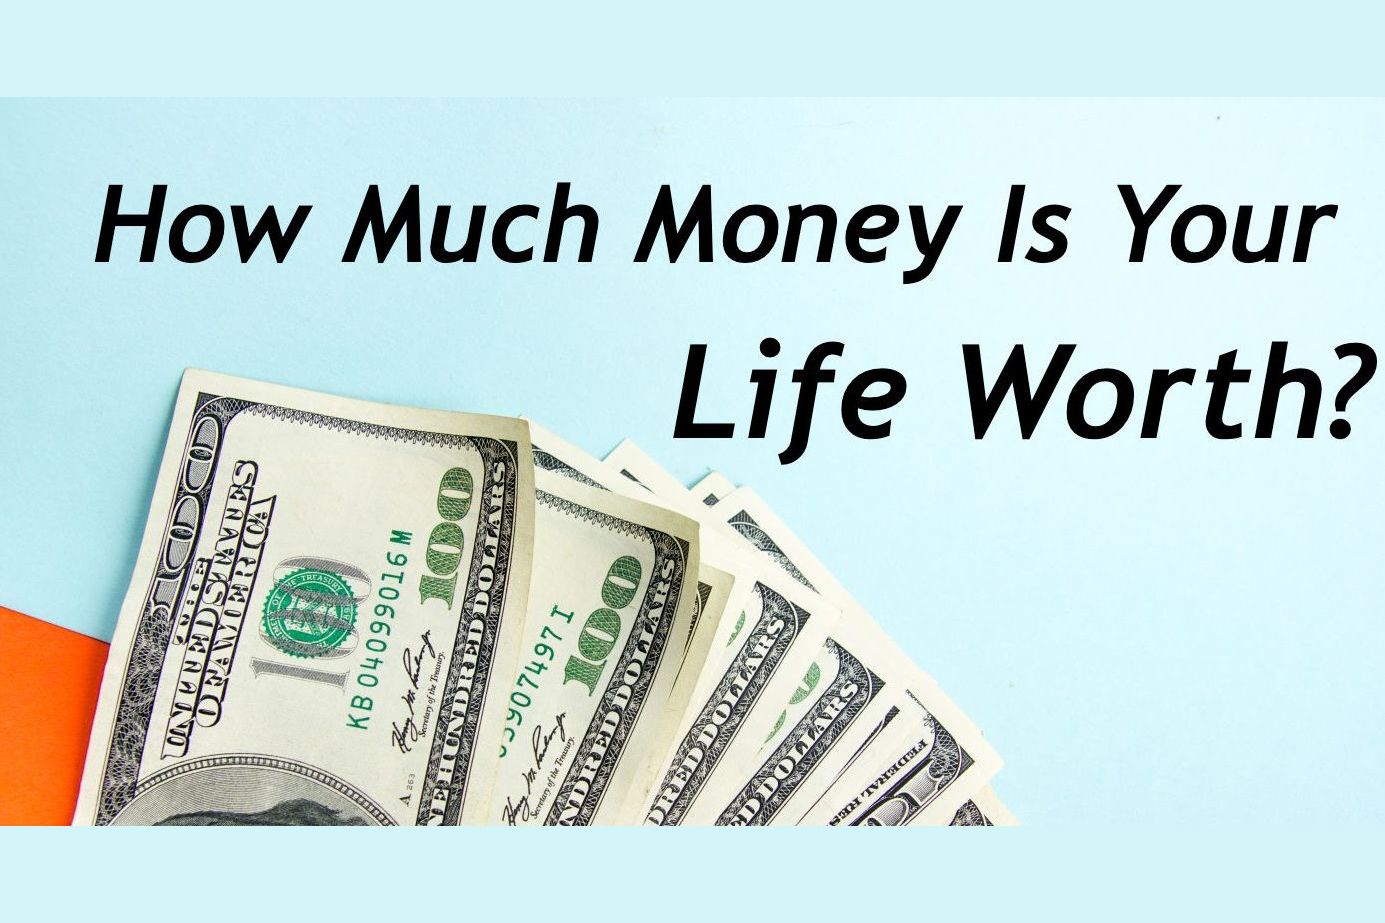 Much money переводы. How much money. Сколько стоит the money. Money is Worth. How much is a Life Worth.